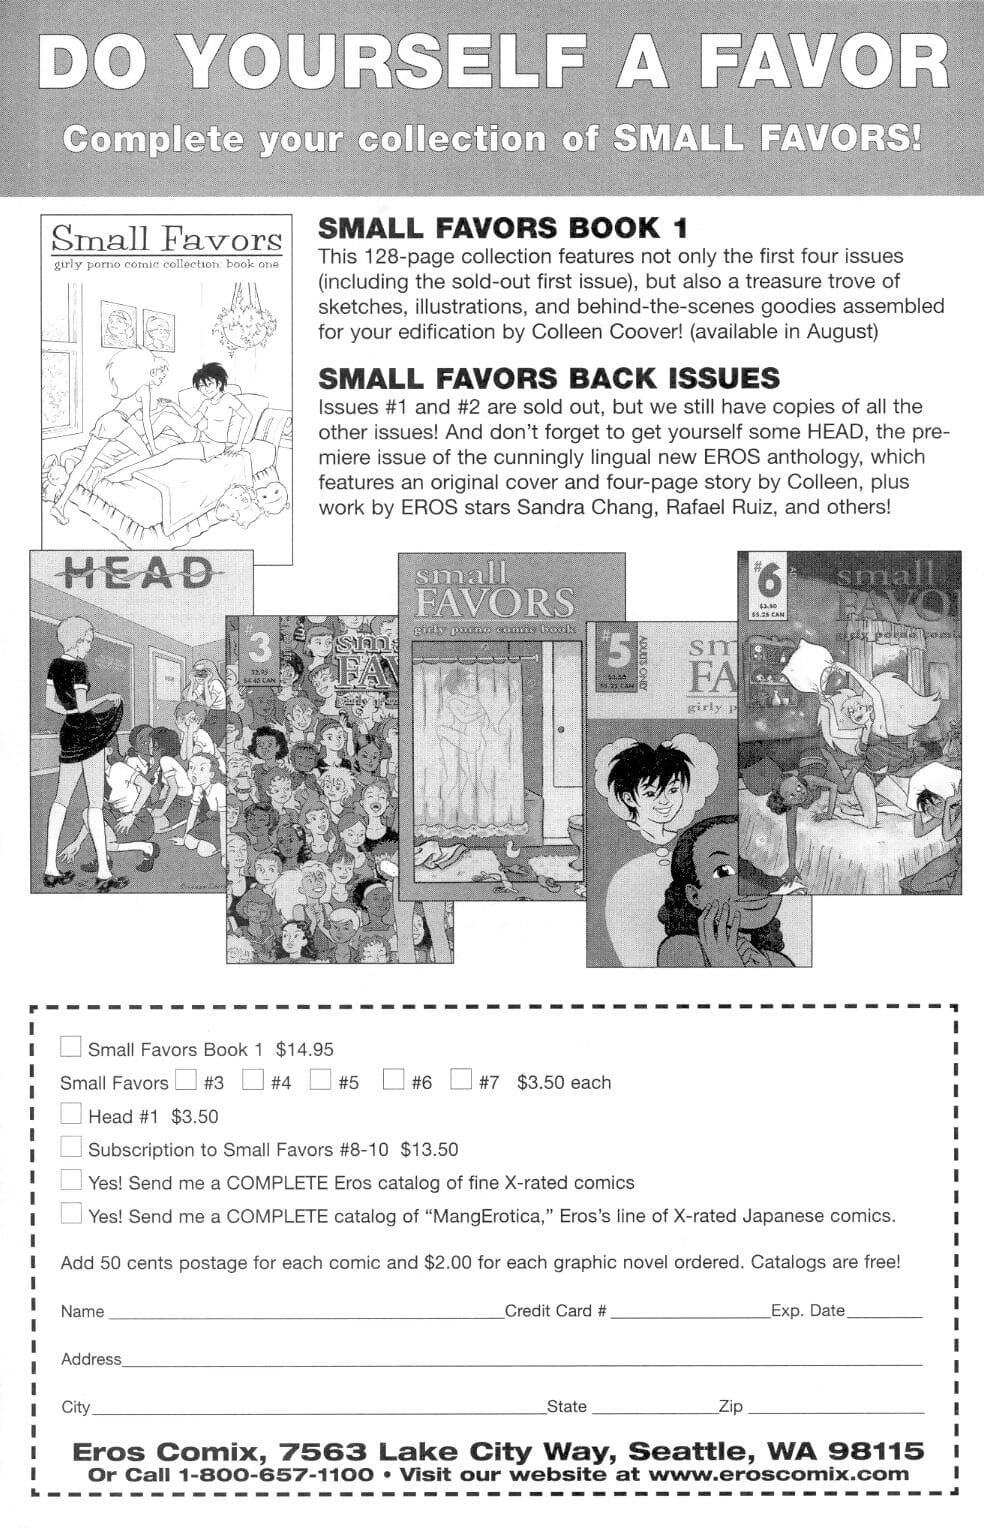 Small Favors Issue #7 ENG page 1